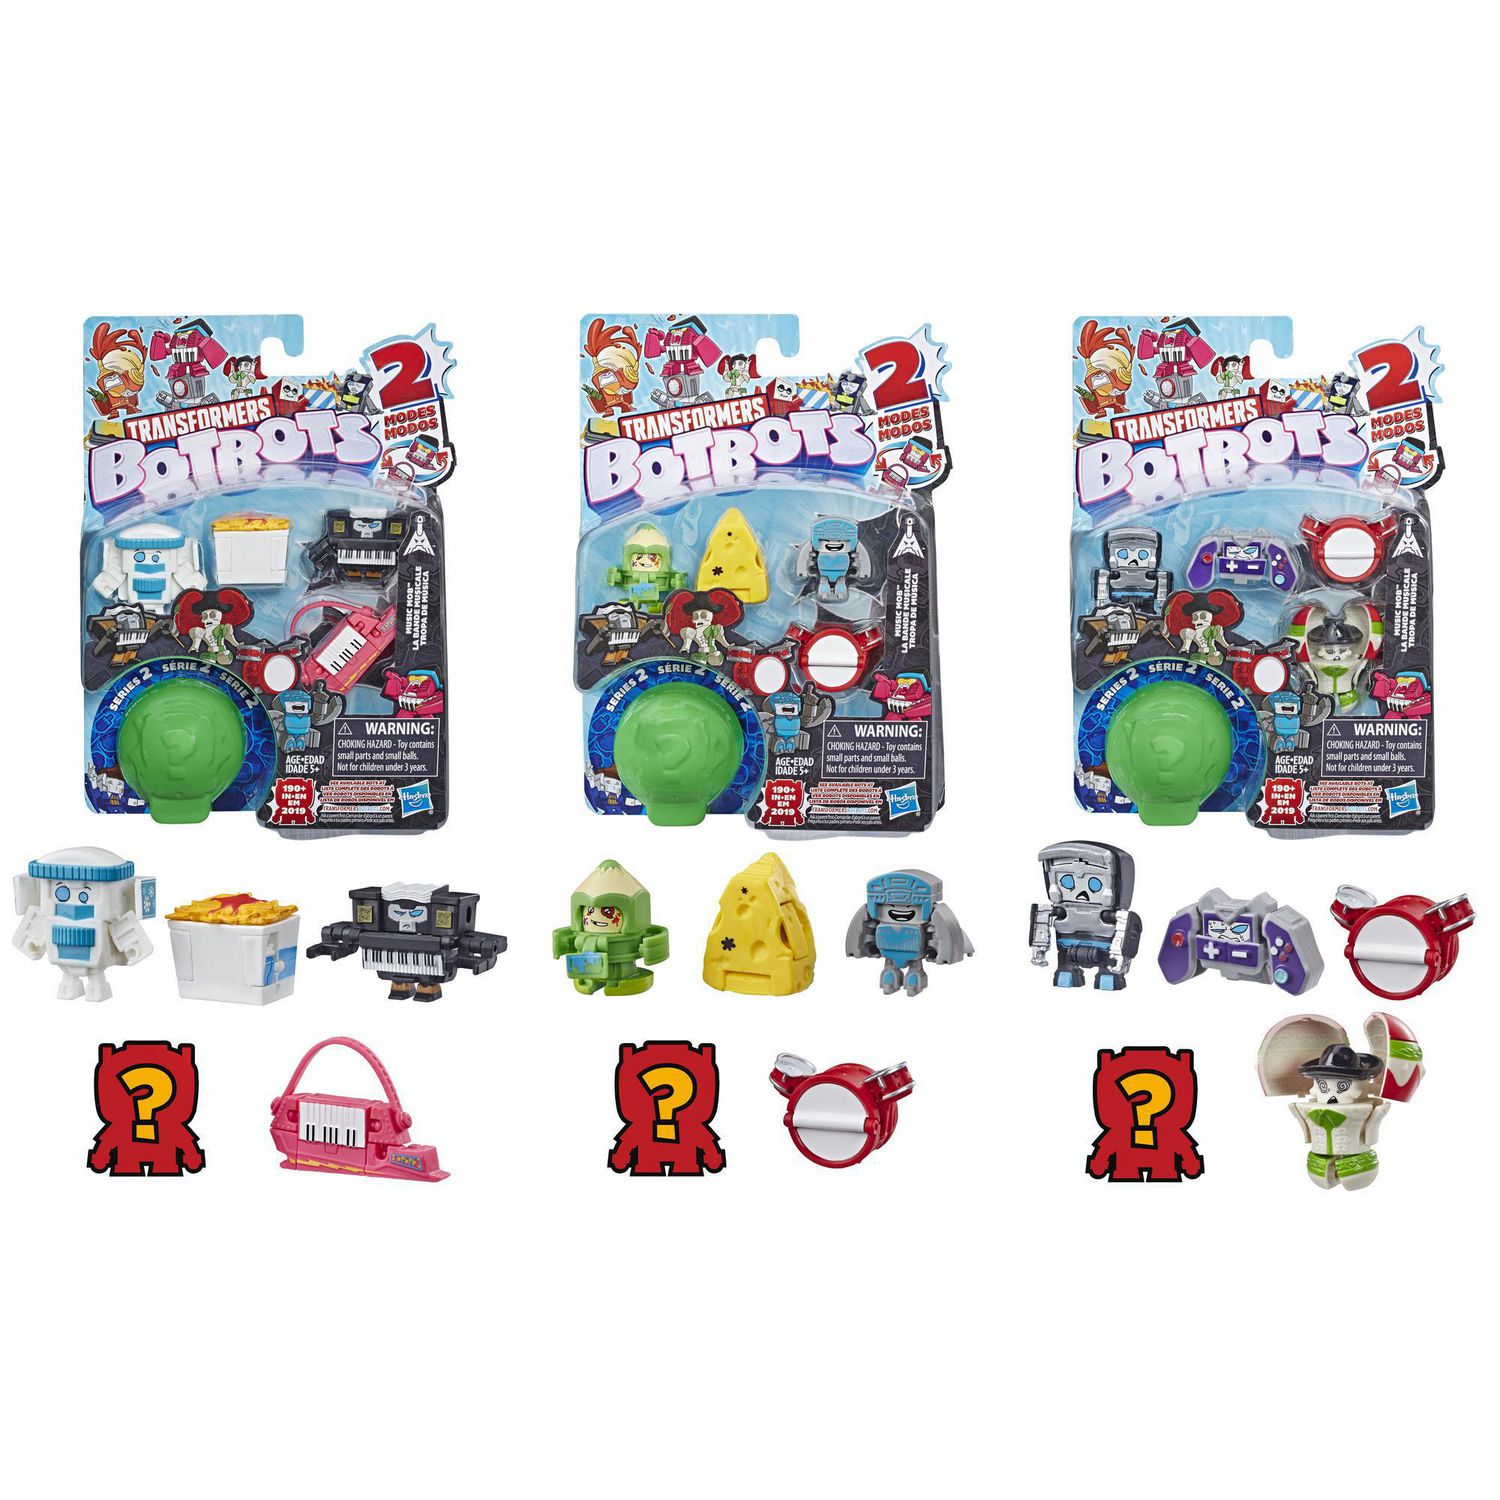 Transformers BotBots Series 2 MUSIC MOB 5-Pack 2-in-1 Collectible Figures 